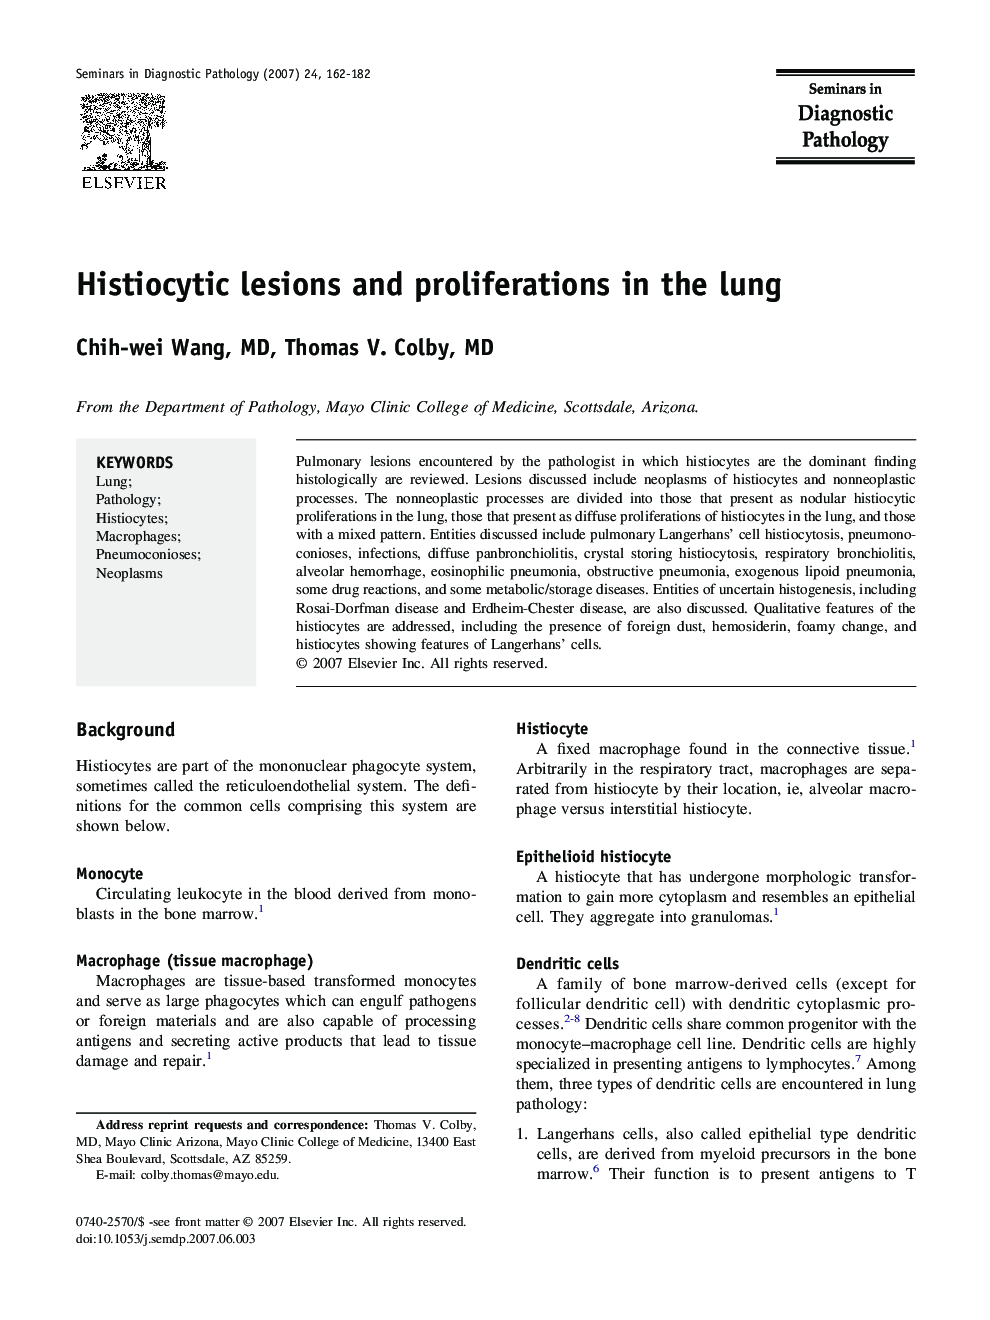 Histiocytic lesions and proliferations in the lung